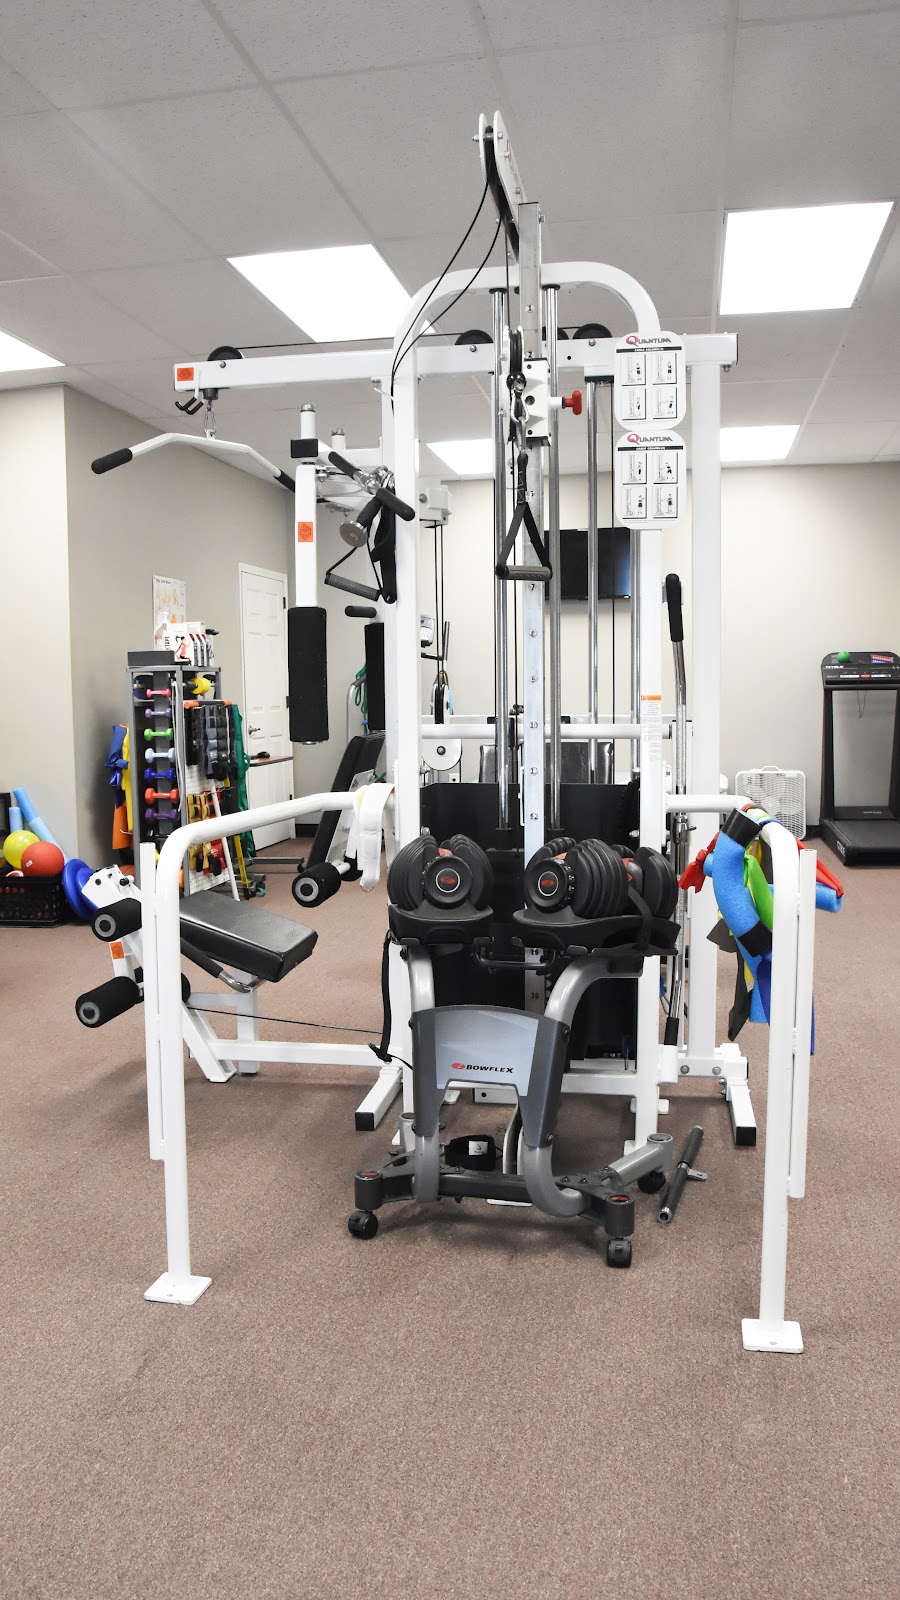 NuLife Physical Therapy | 705 S Broadway B, Portland, TN 37148 | Phone: (615) 325-9007